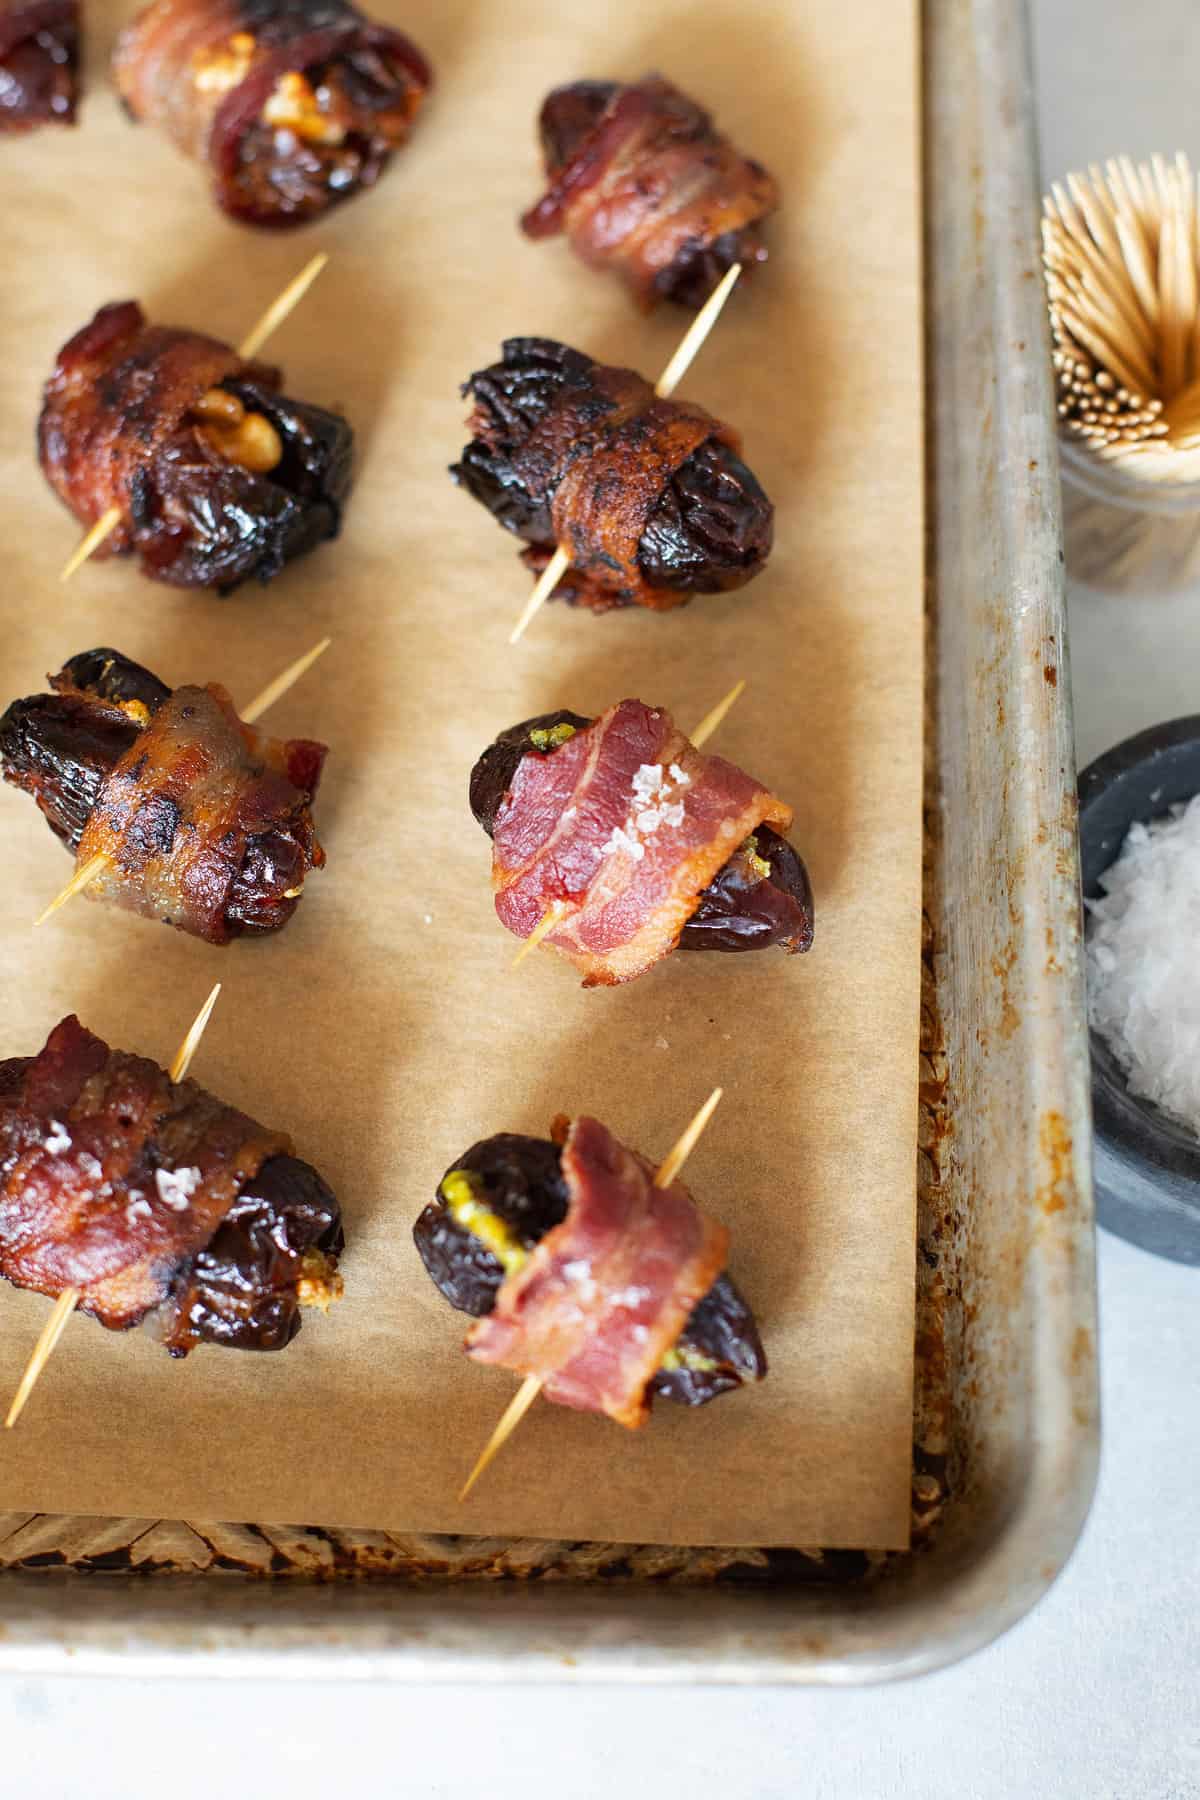 How to Make Bacon-Wrapped Dates by Aida Mollenkamp